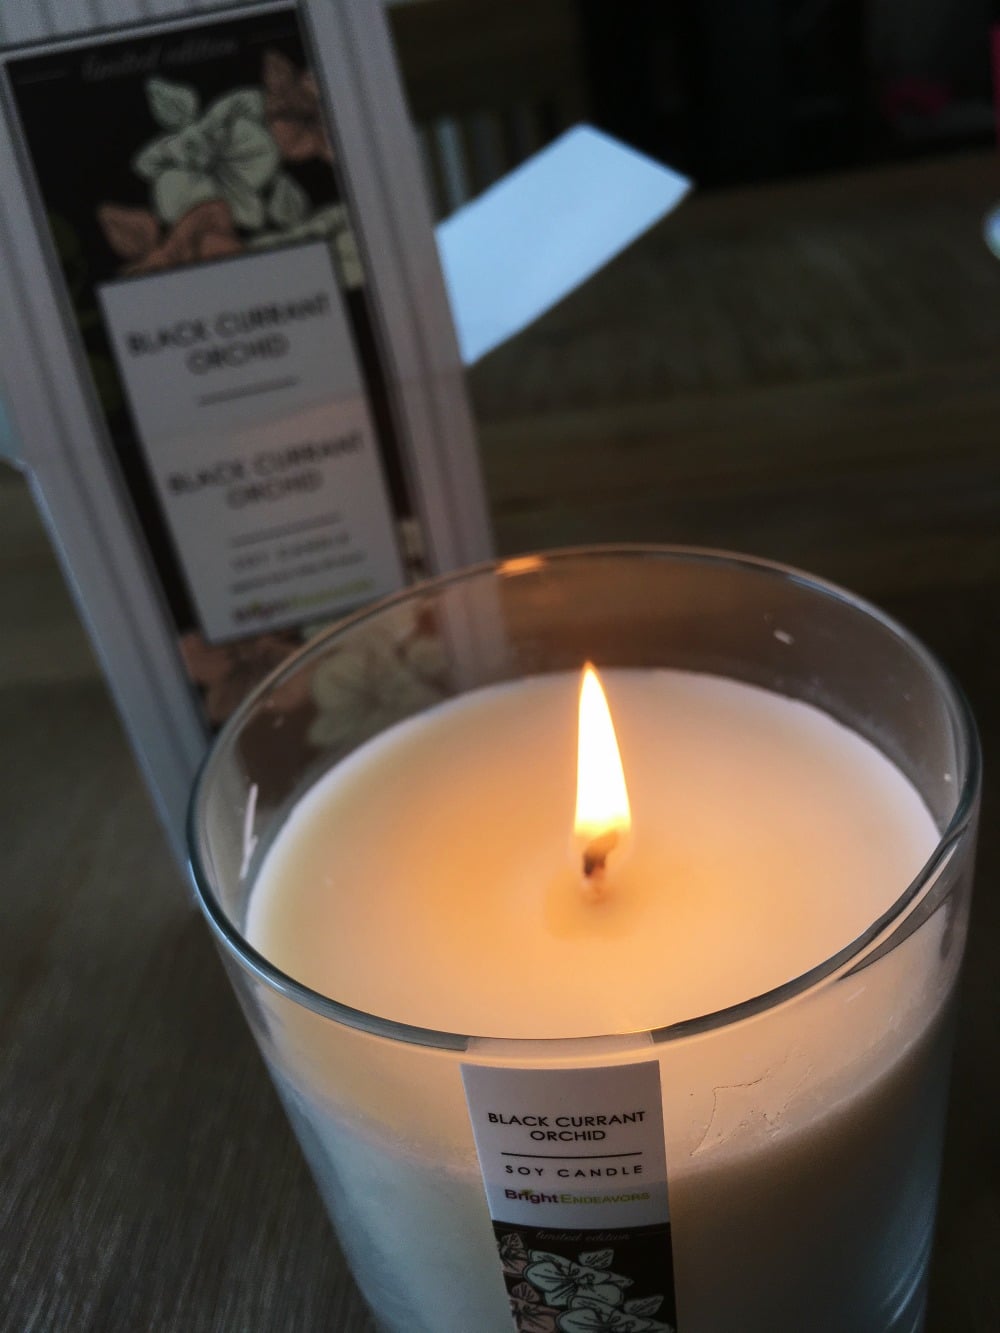 bright endeavors candle